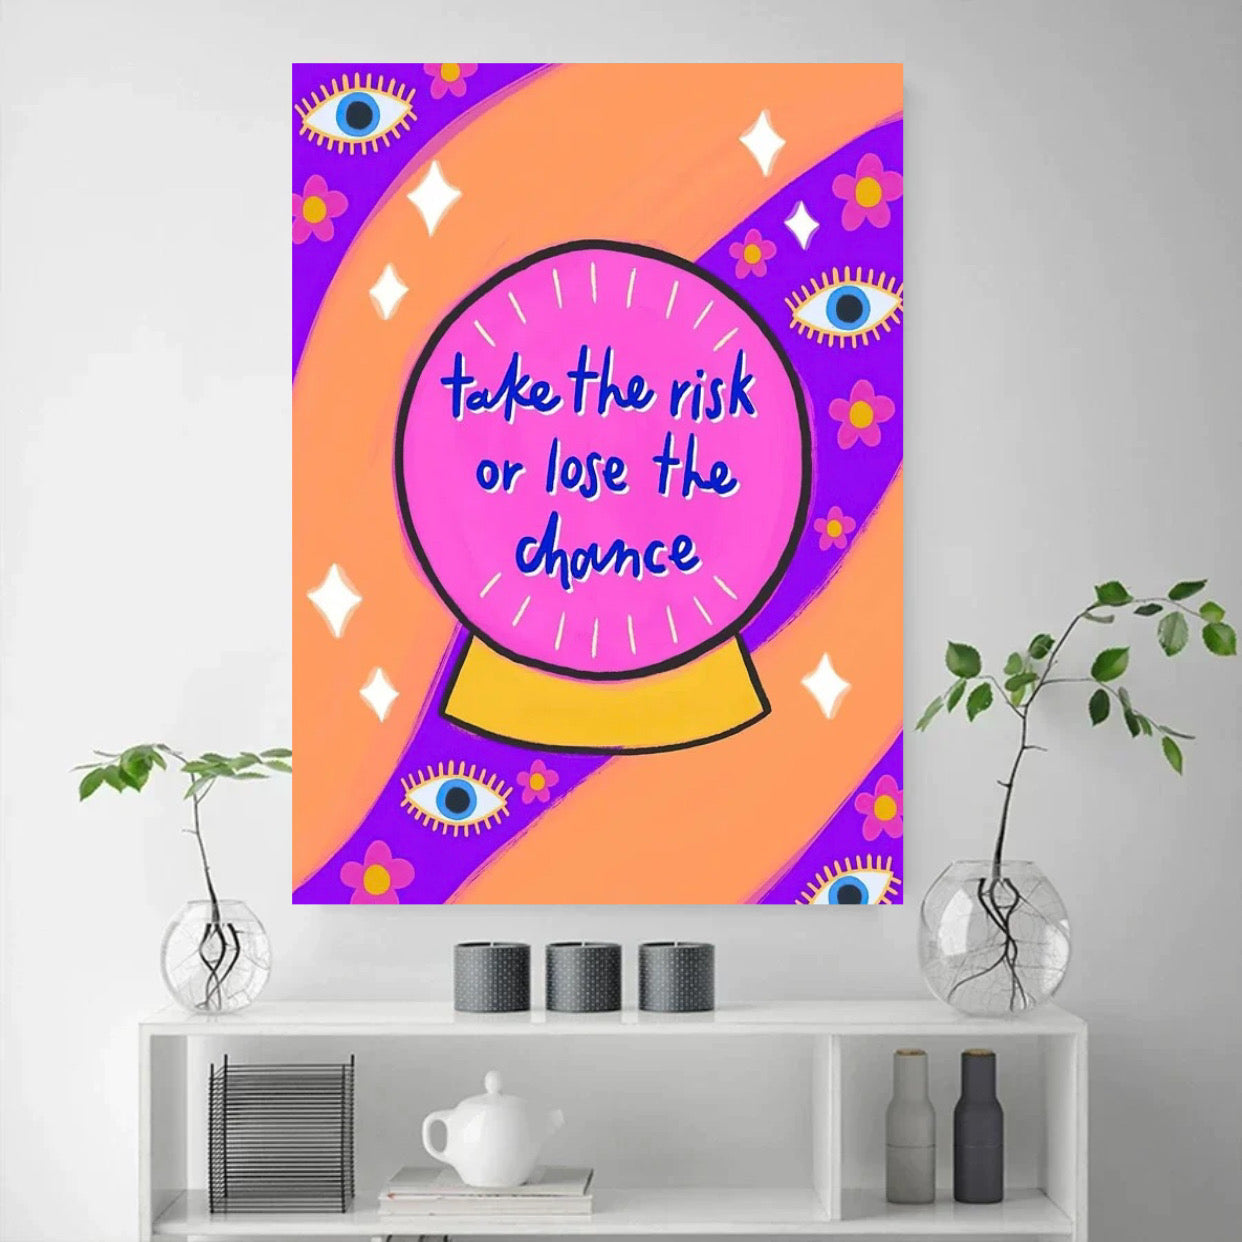 "take the risk or lose the chance" poster